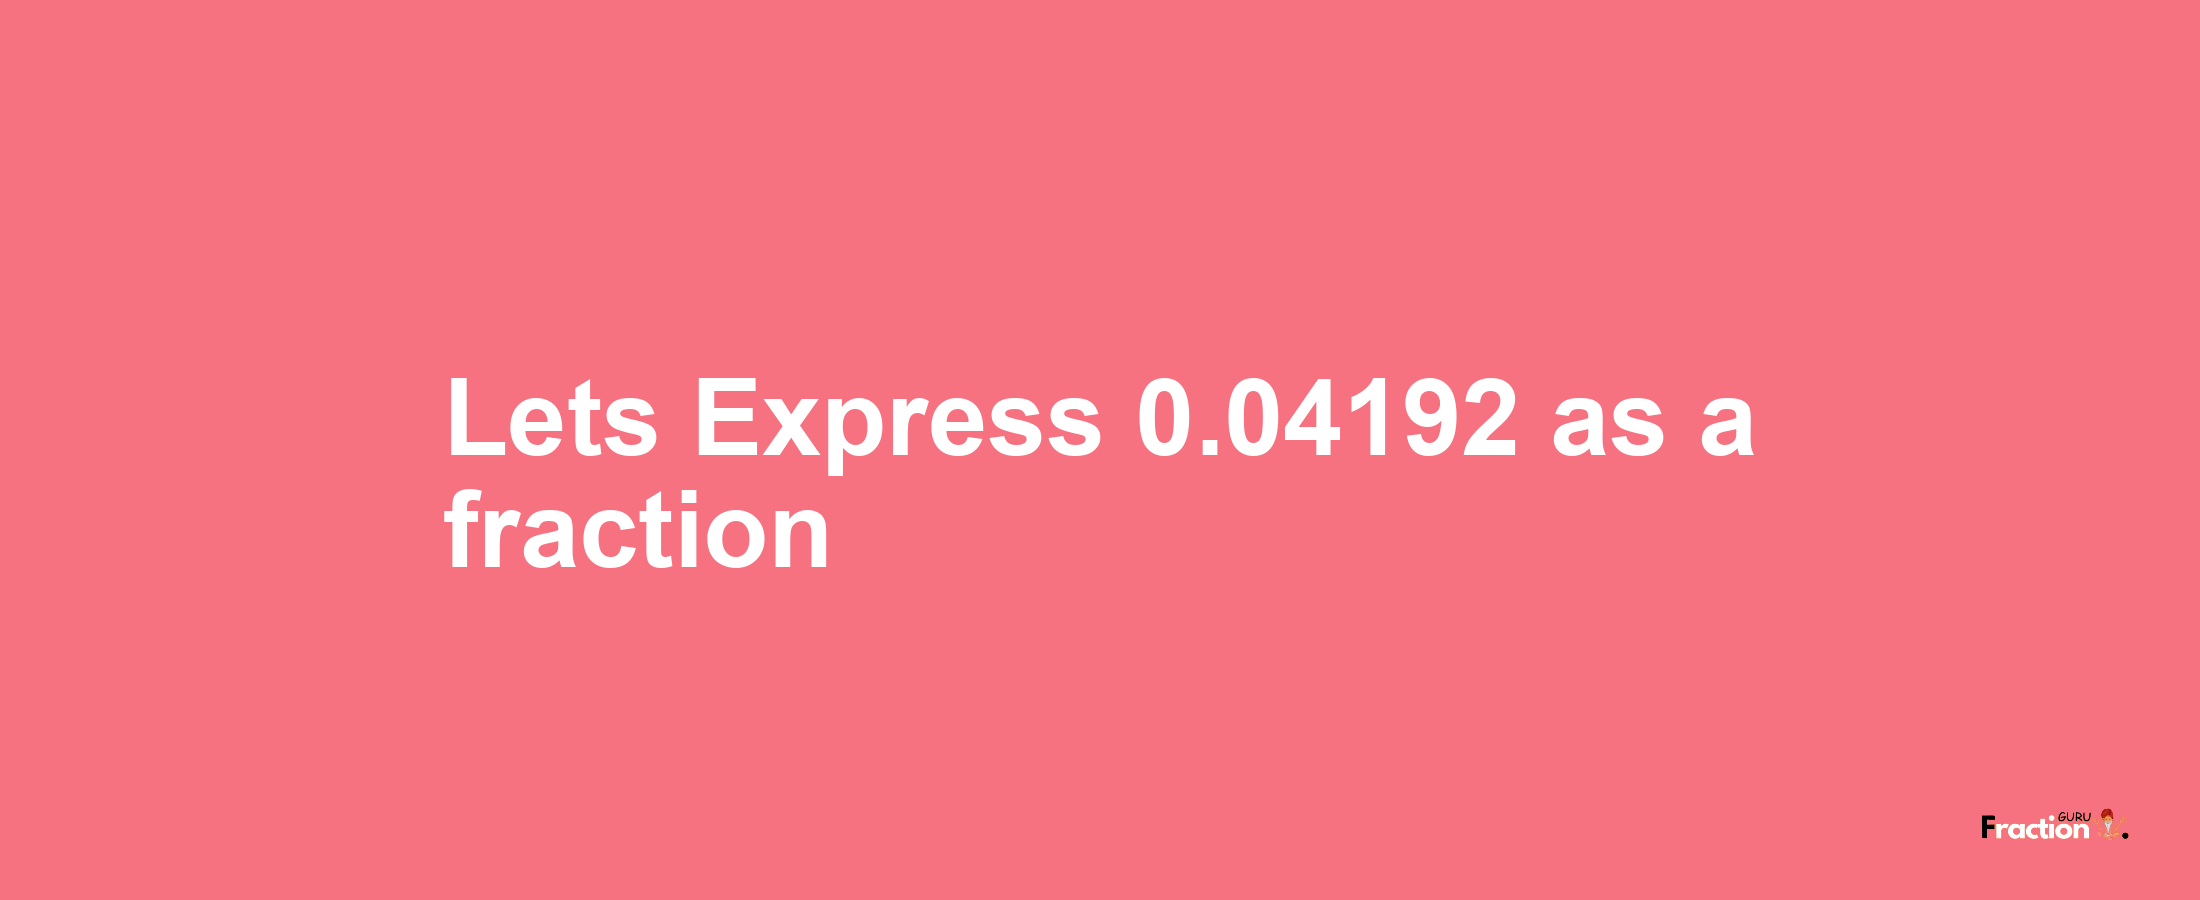 Lets Express 0.04192 as afraction